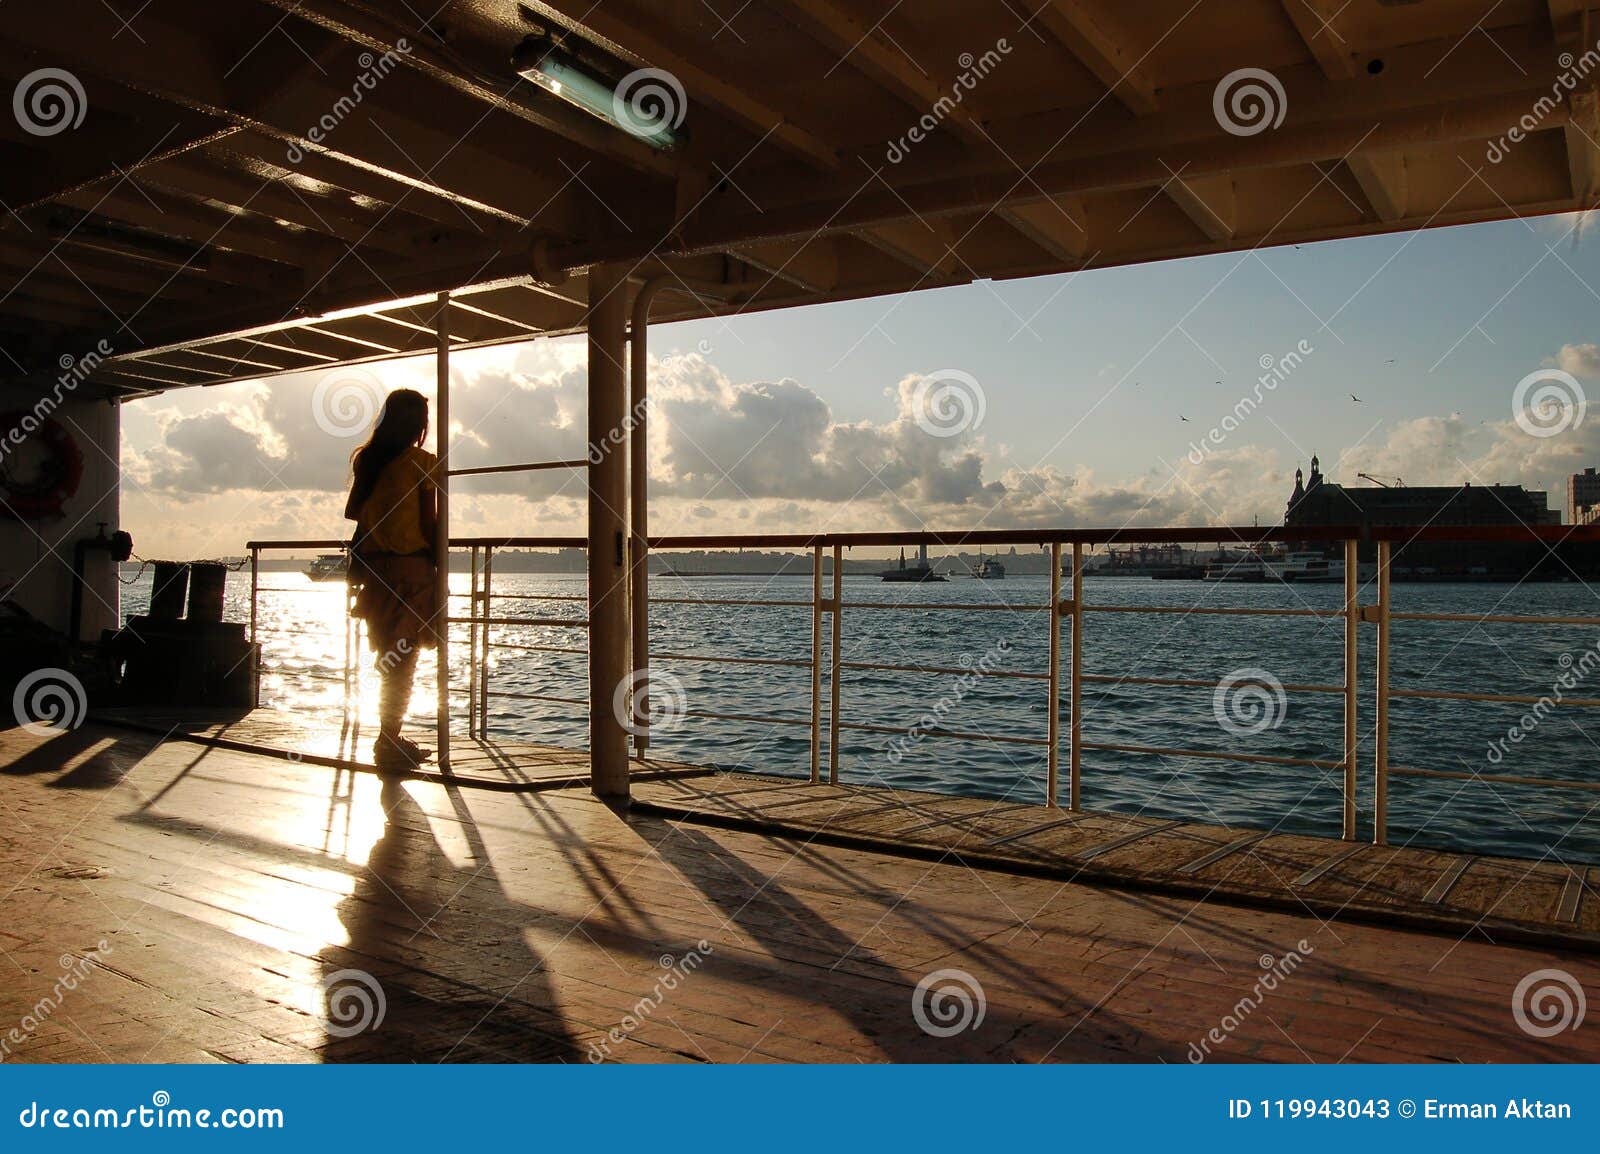 a girl on a city liner ship